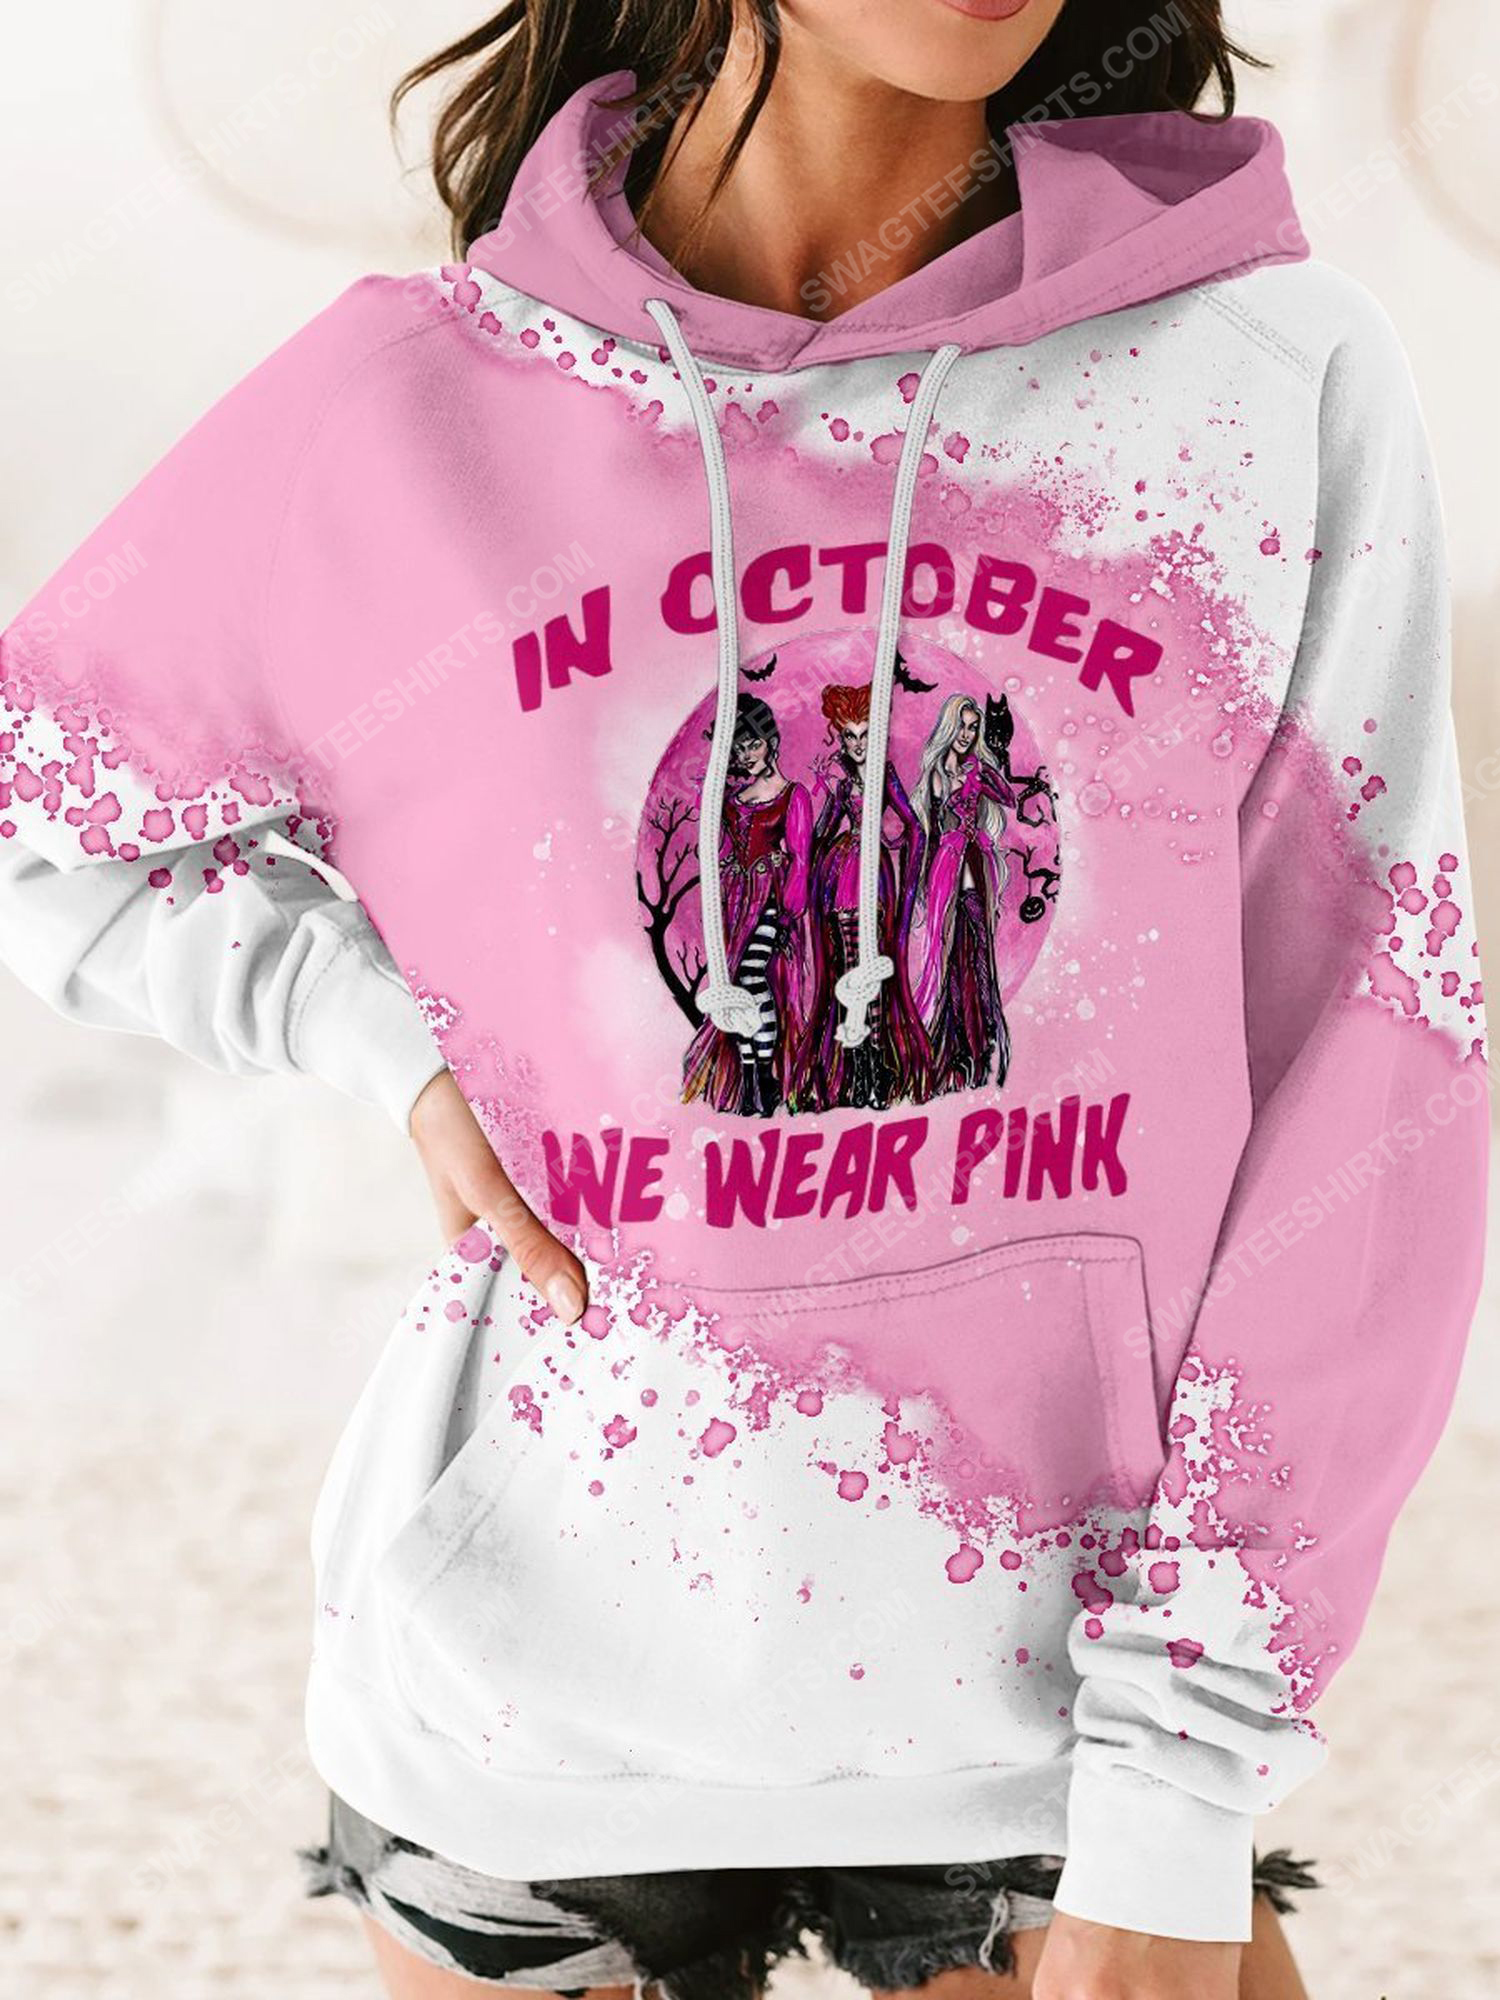 [special edition] Breast cancer in october we wear pink hocus pocus witch full print shirt – maria (cancer)